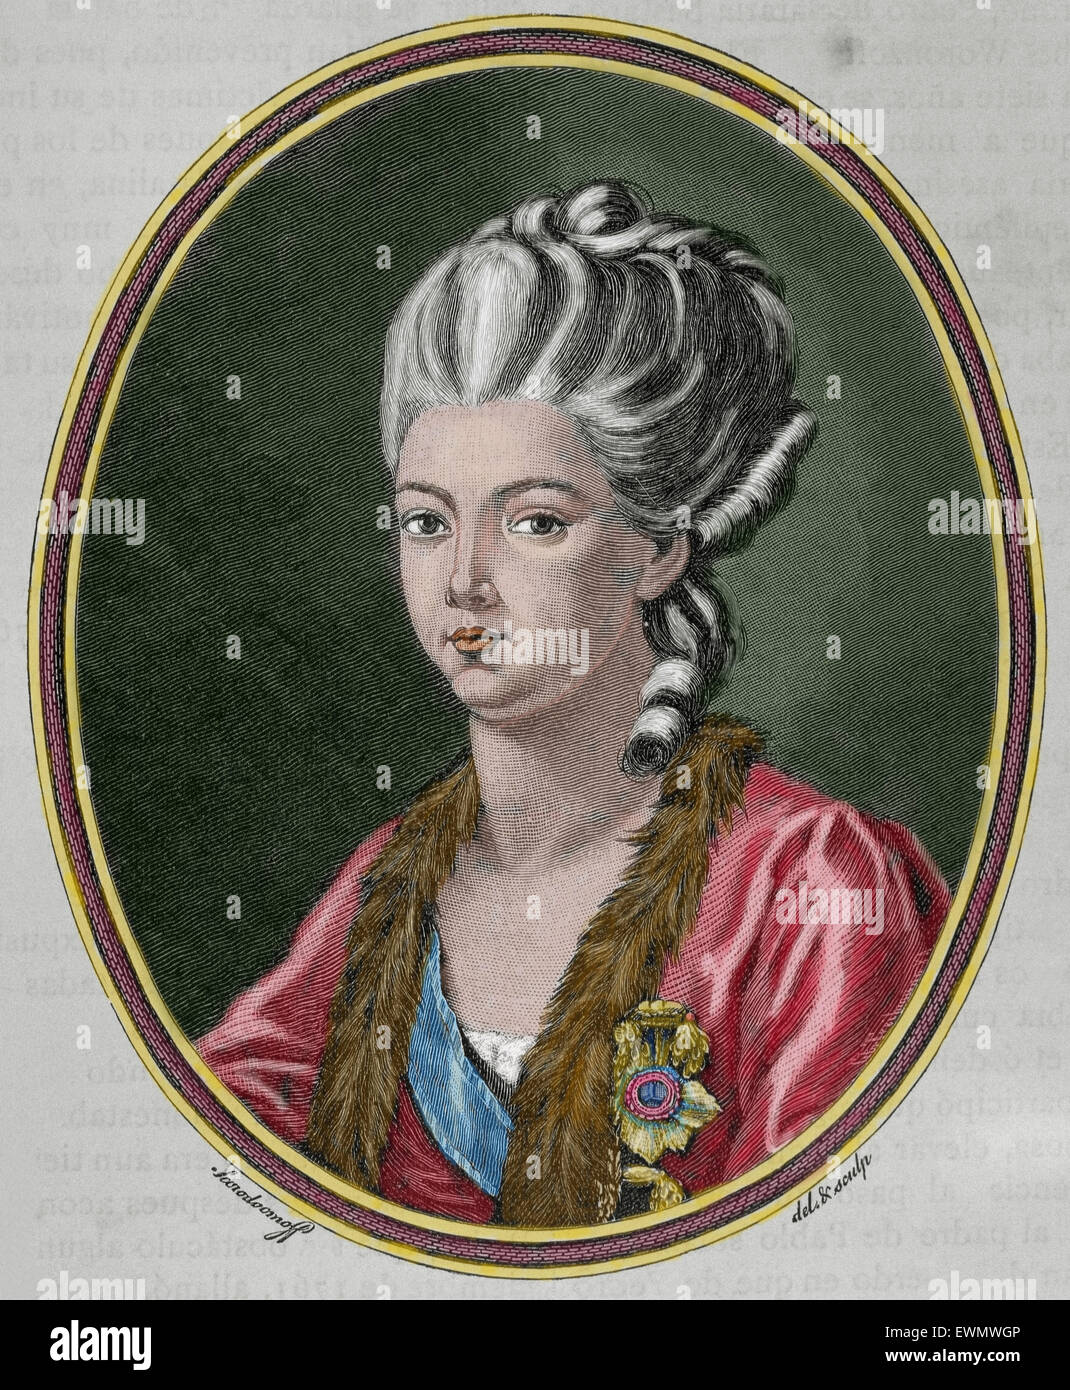 Princess Daschkaw (18th c.), lady of Honour to Catherine II of Russia. Engraving by Treibmann, 1881. Colored. Stock Photo